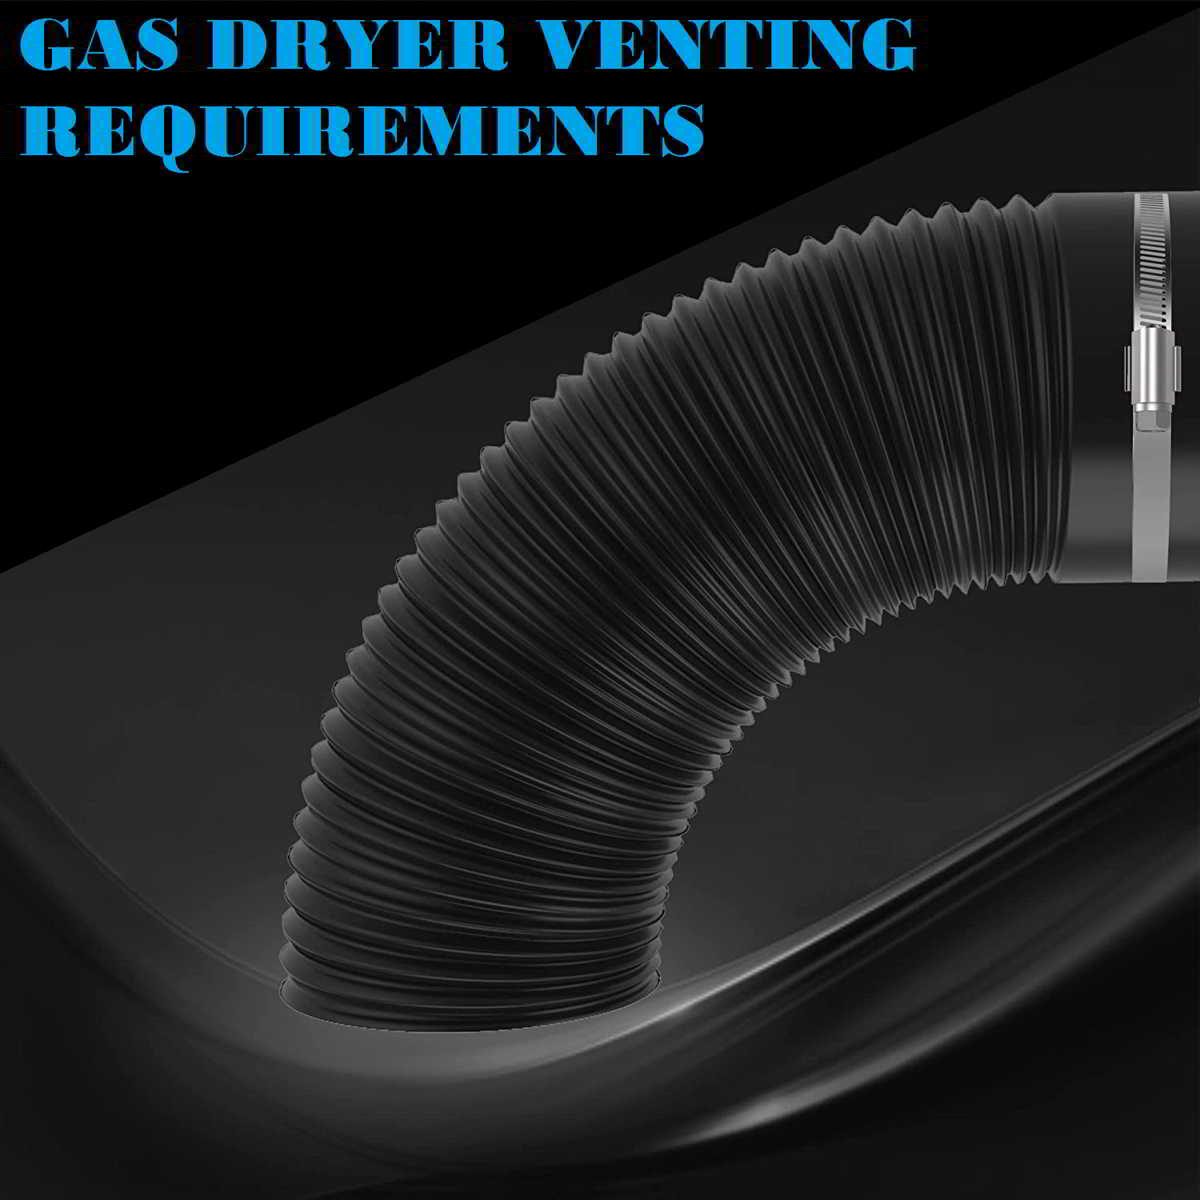 Gas dryer venting requirements